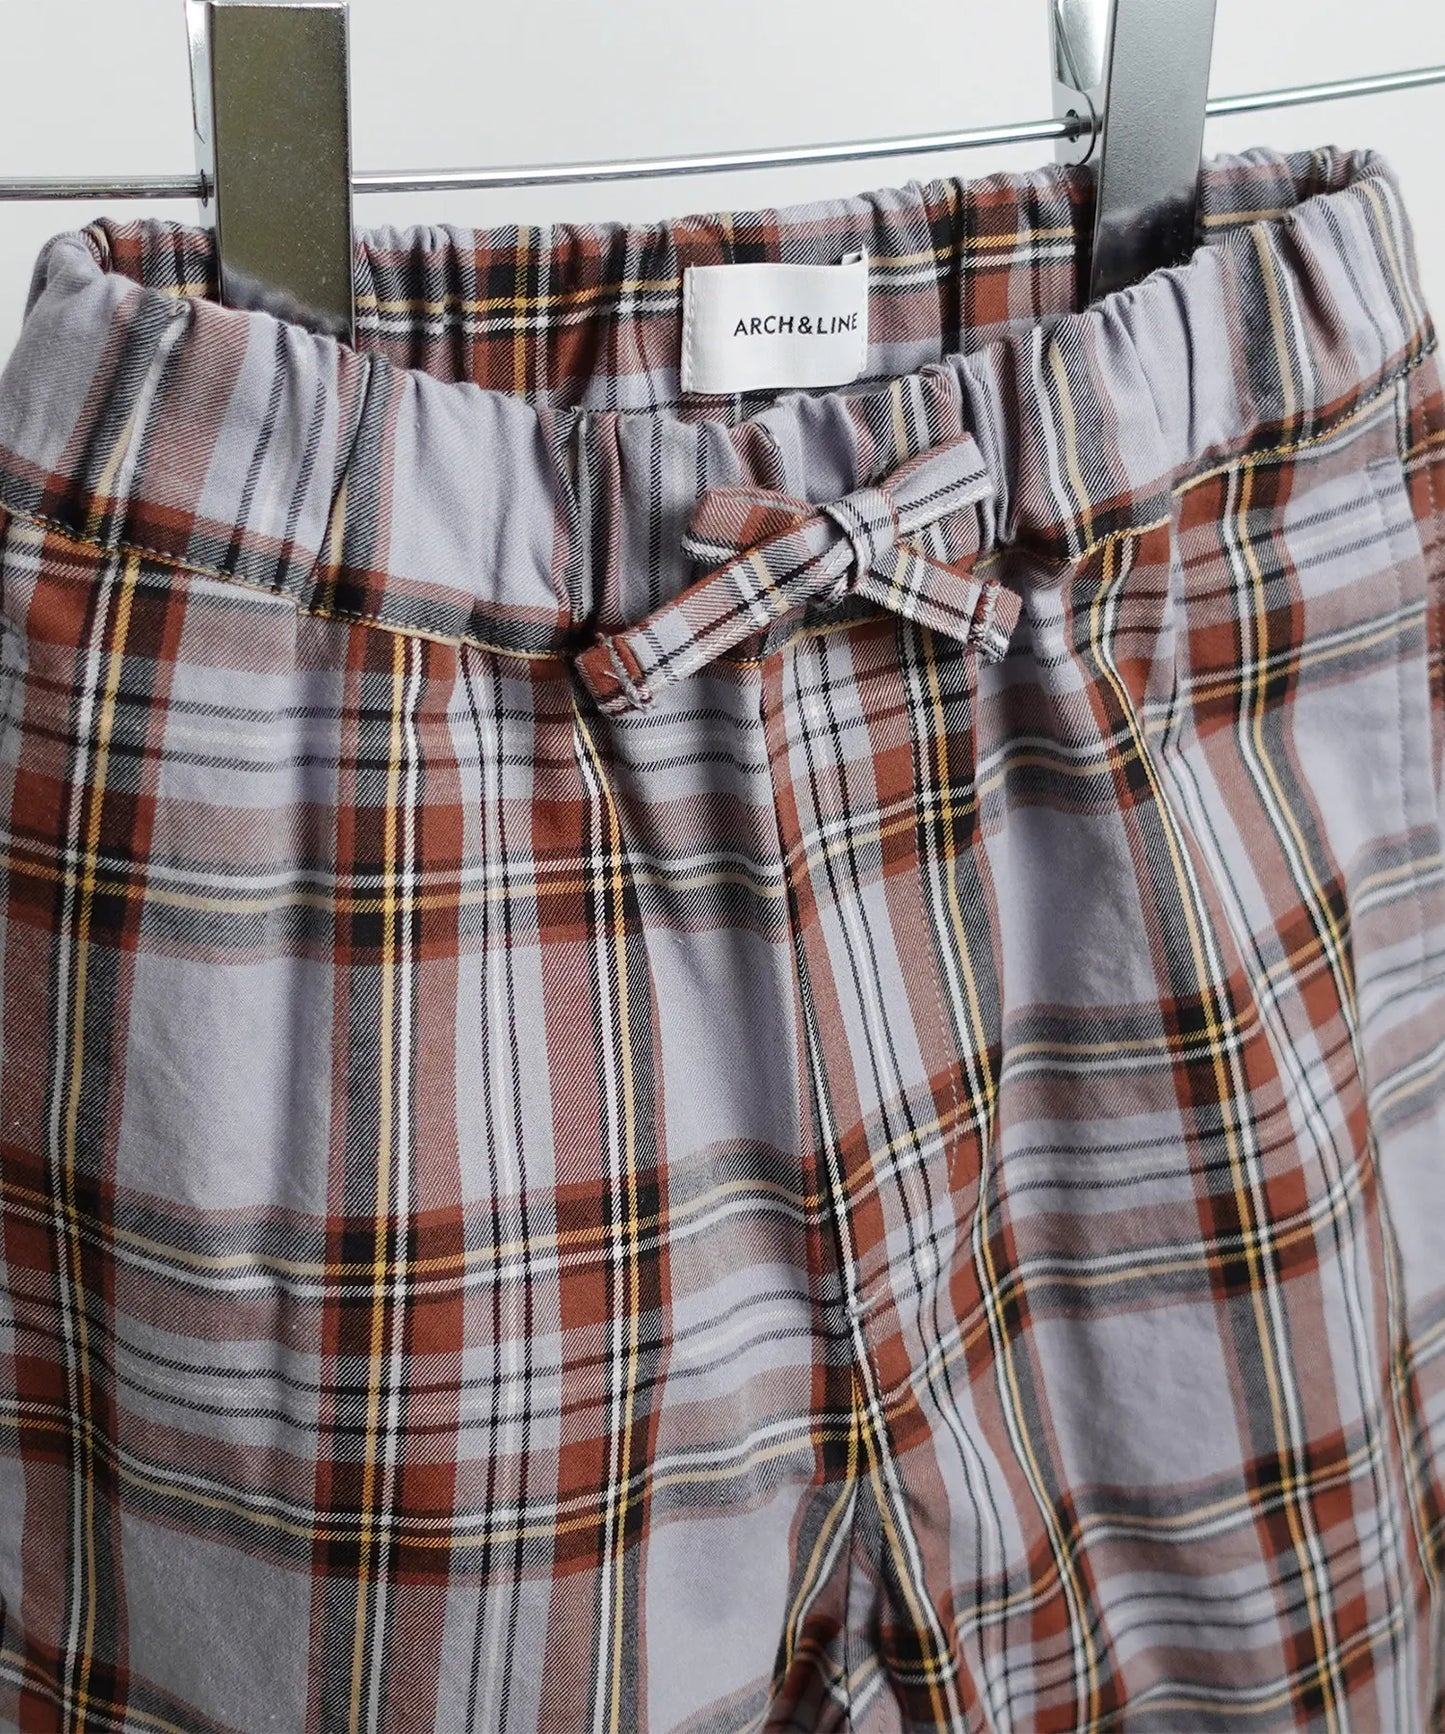 TARTAN EASY PANTS Year-round material Tartan check wide tapered [145-175cm]